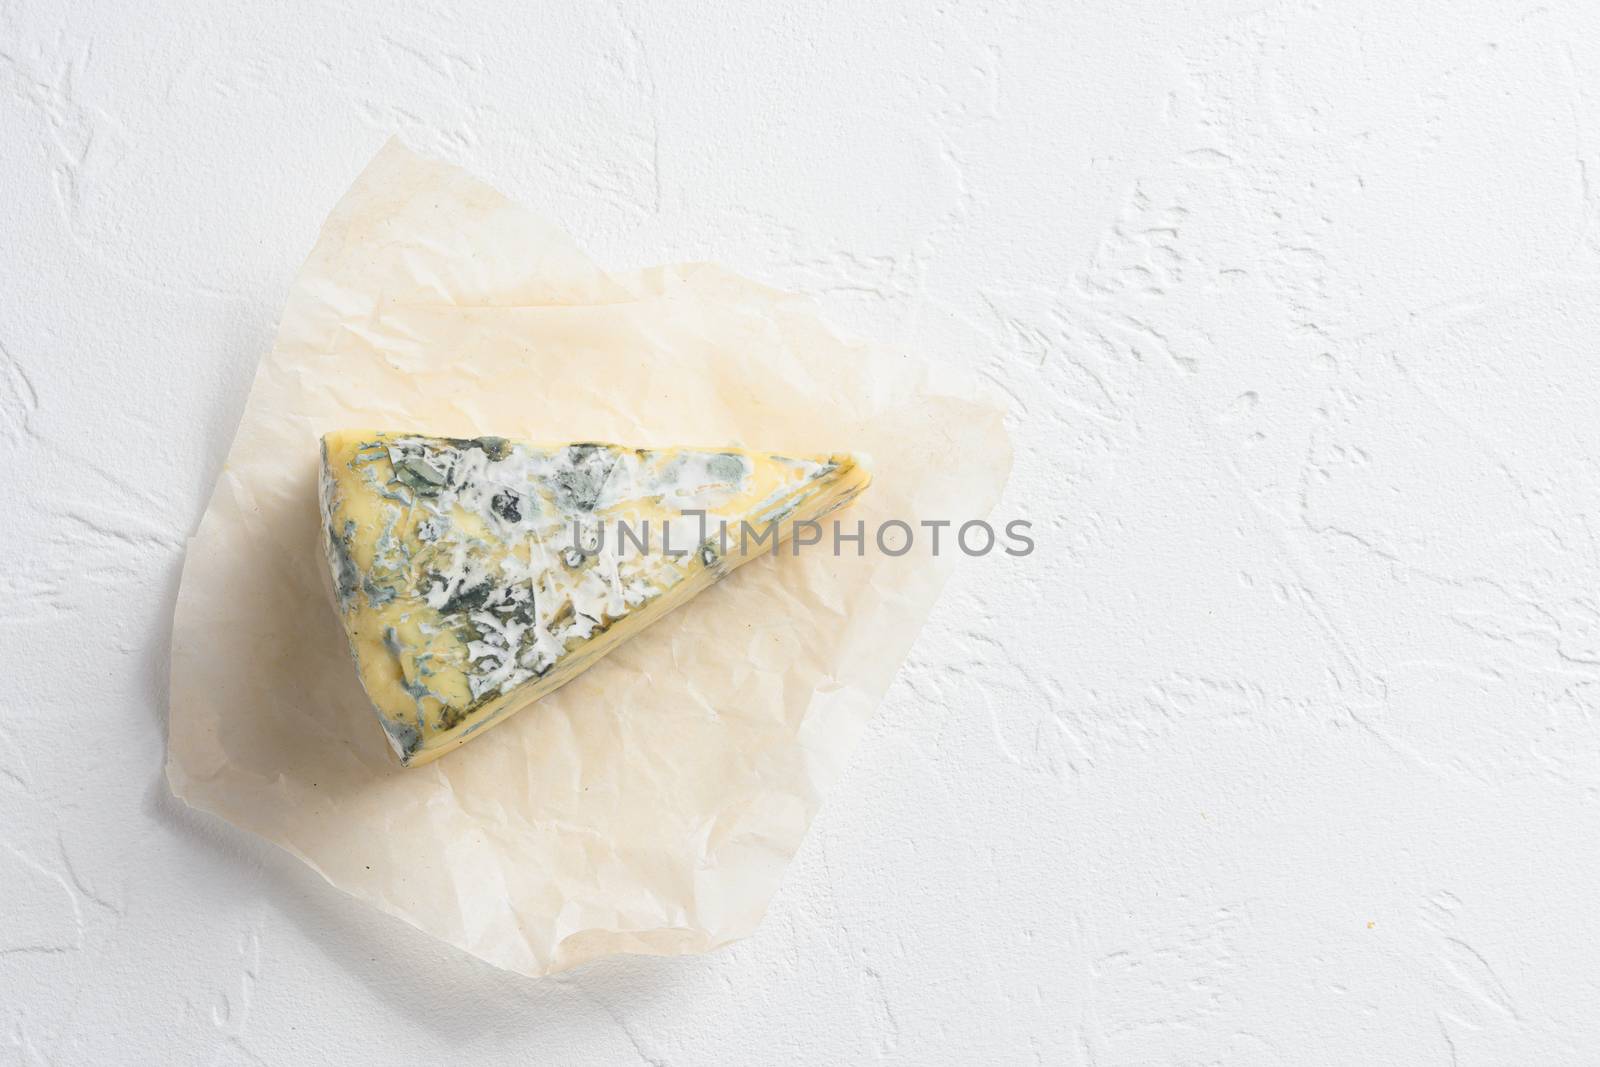 Dor Blue molded cheese france cheese on slate background. Concept top view space for text.